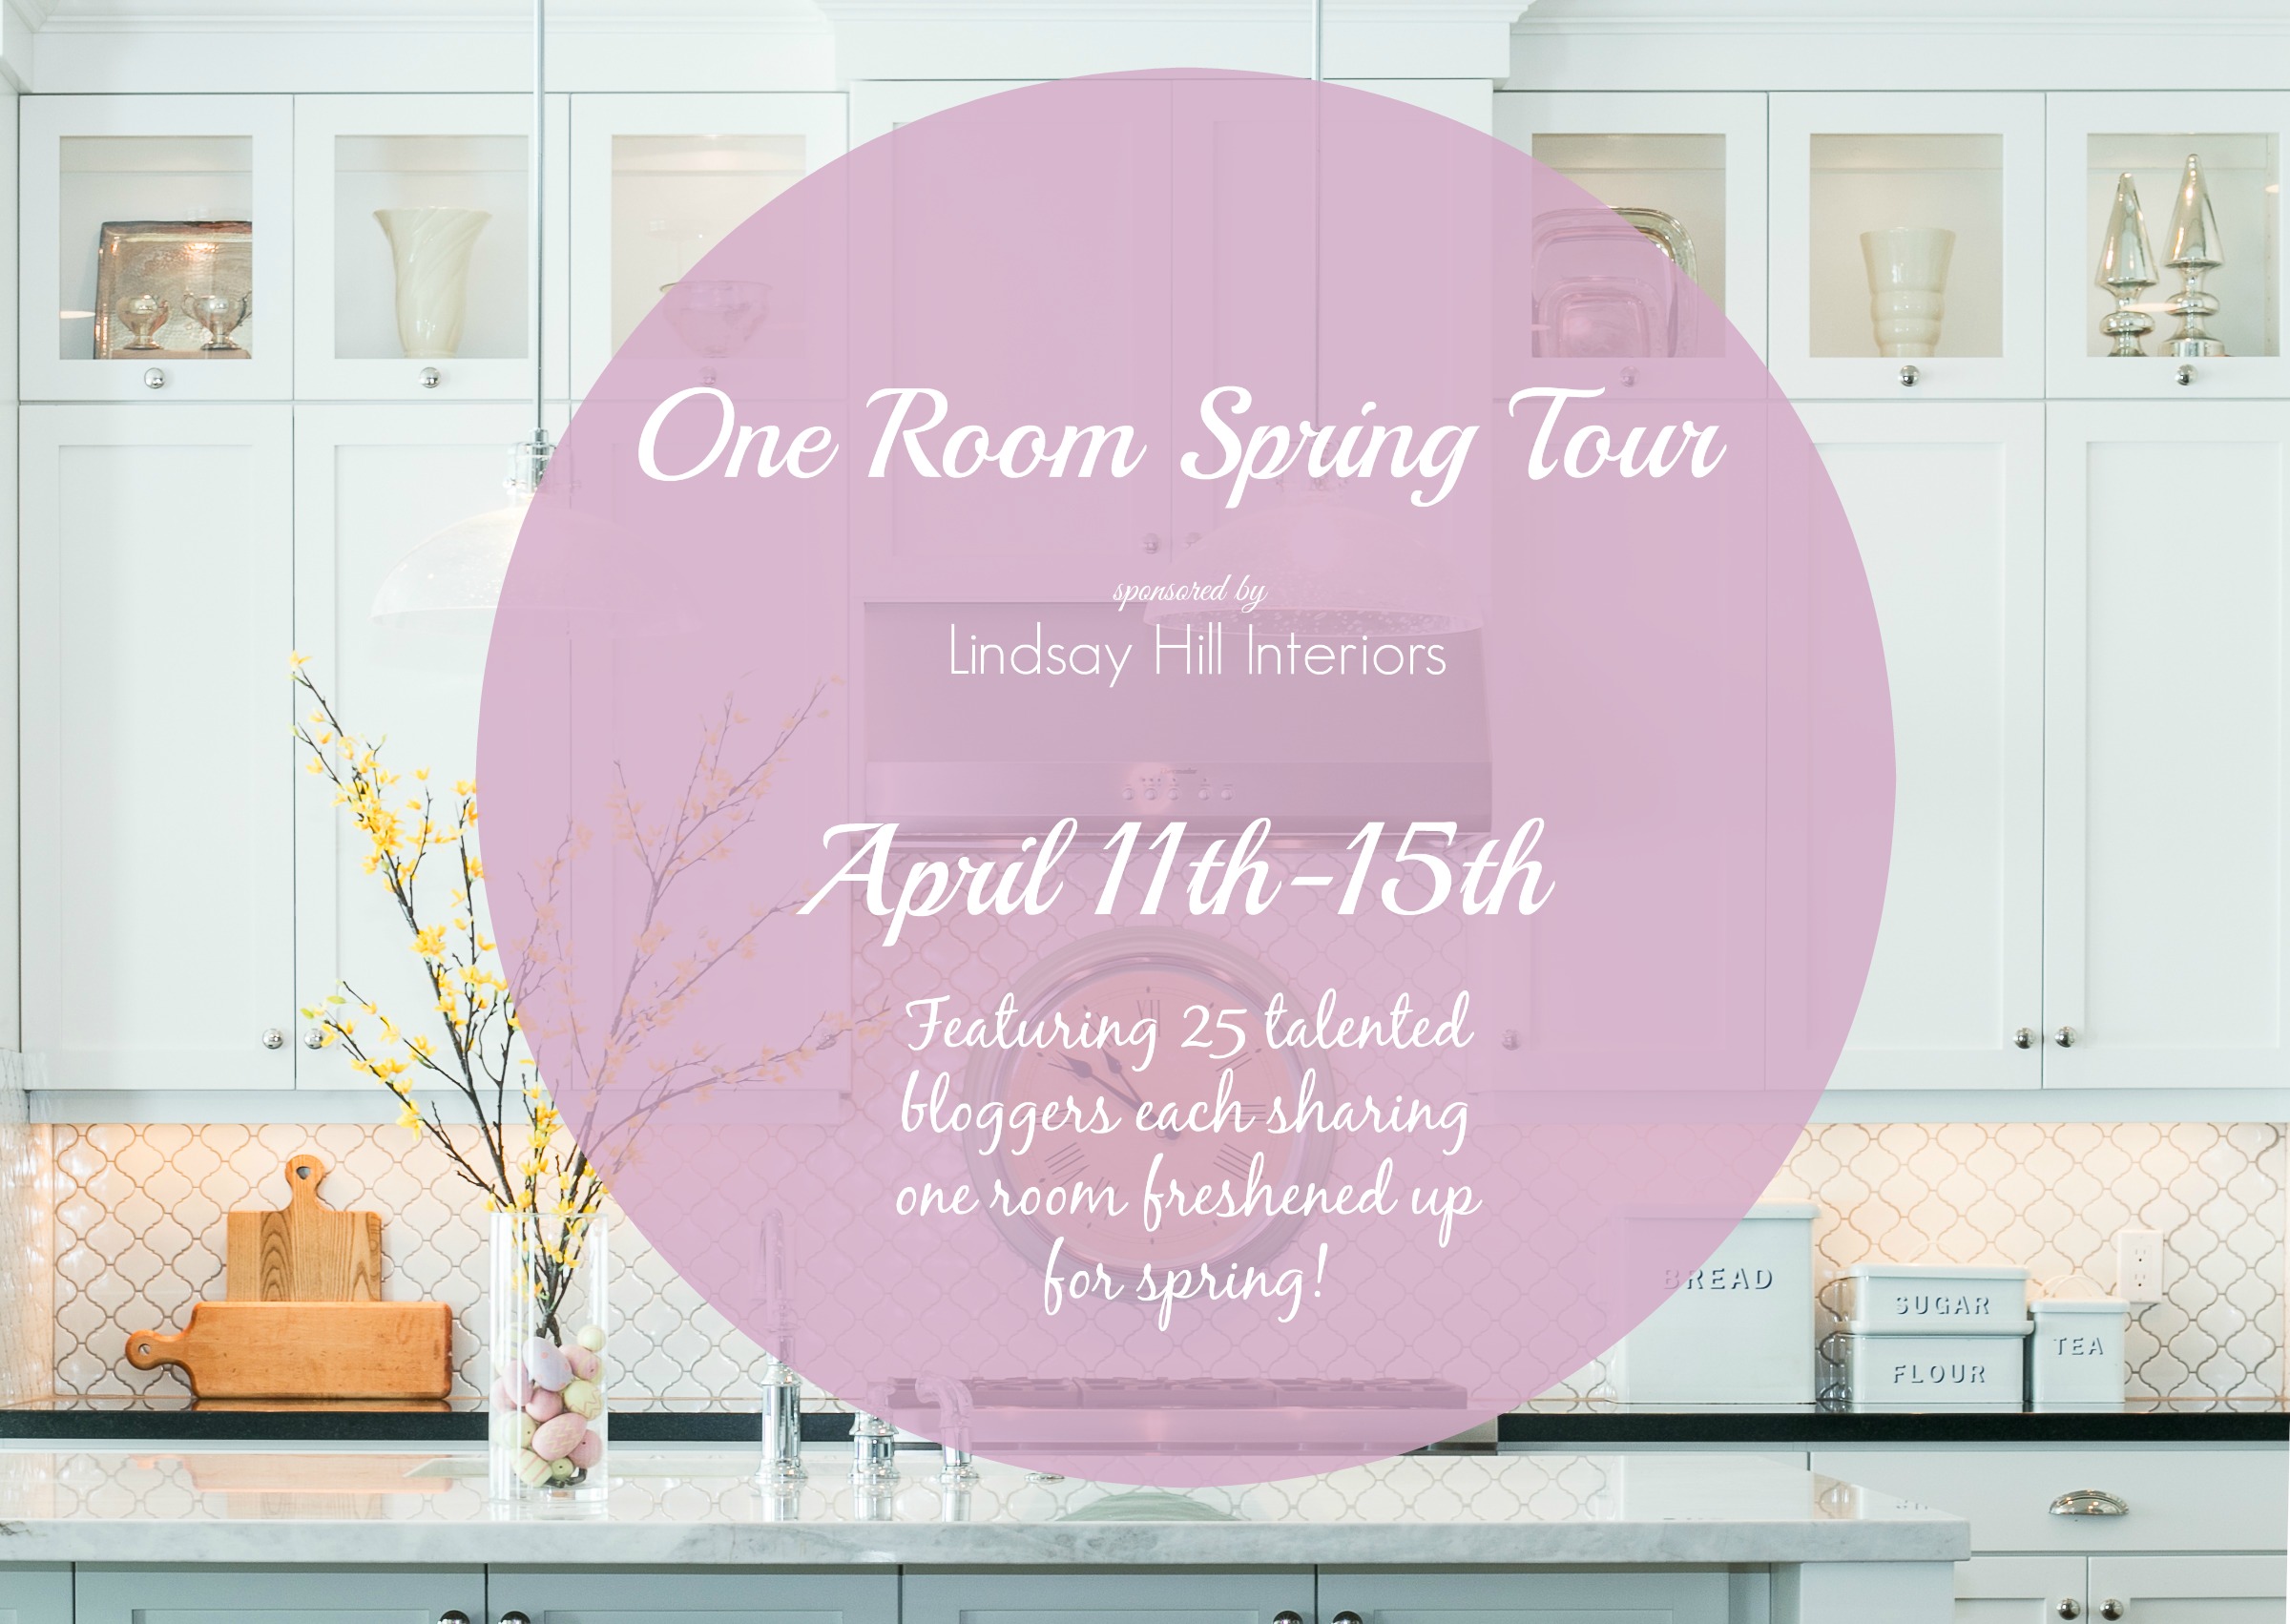 One Room Spring Tour graphic